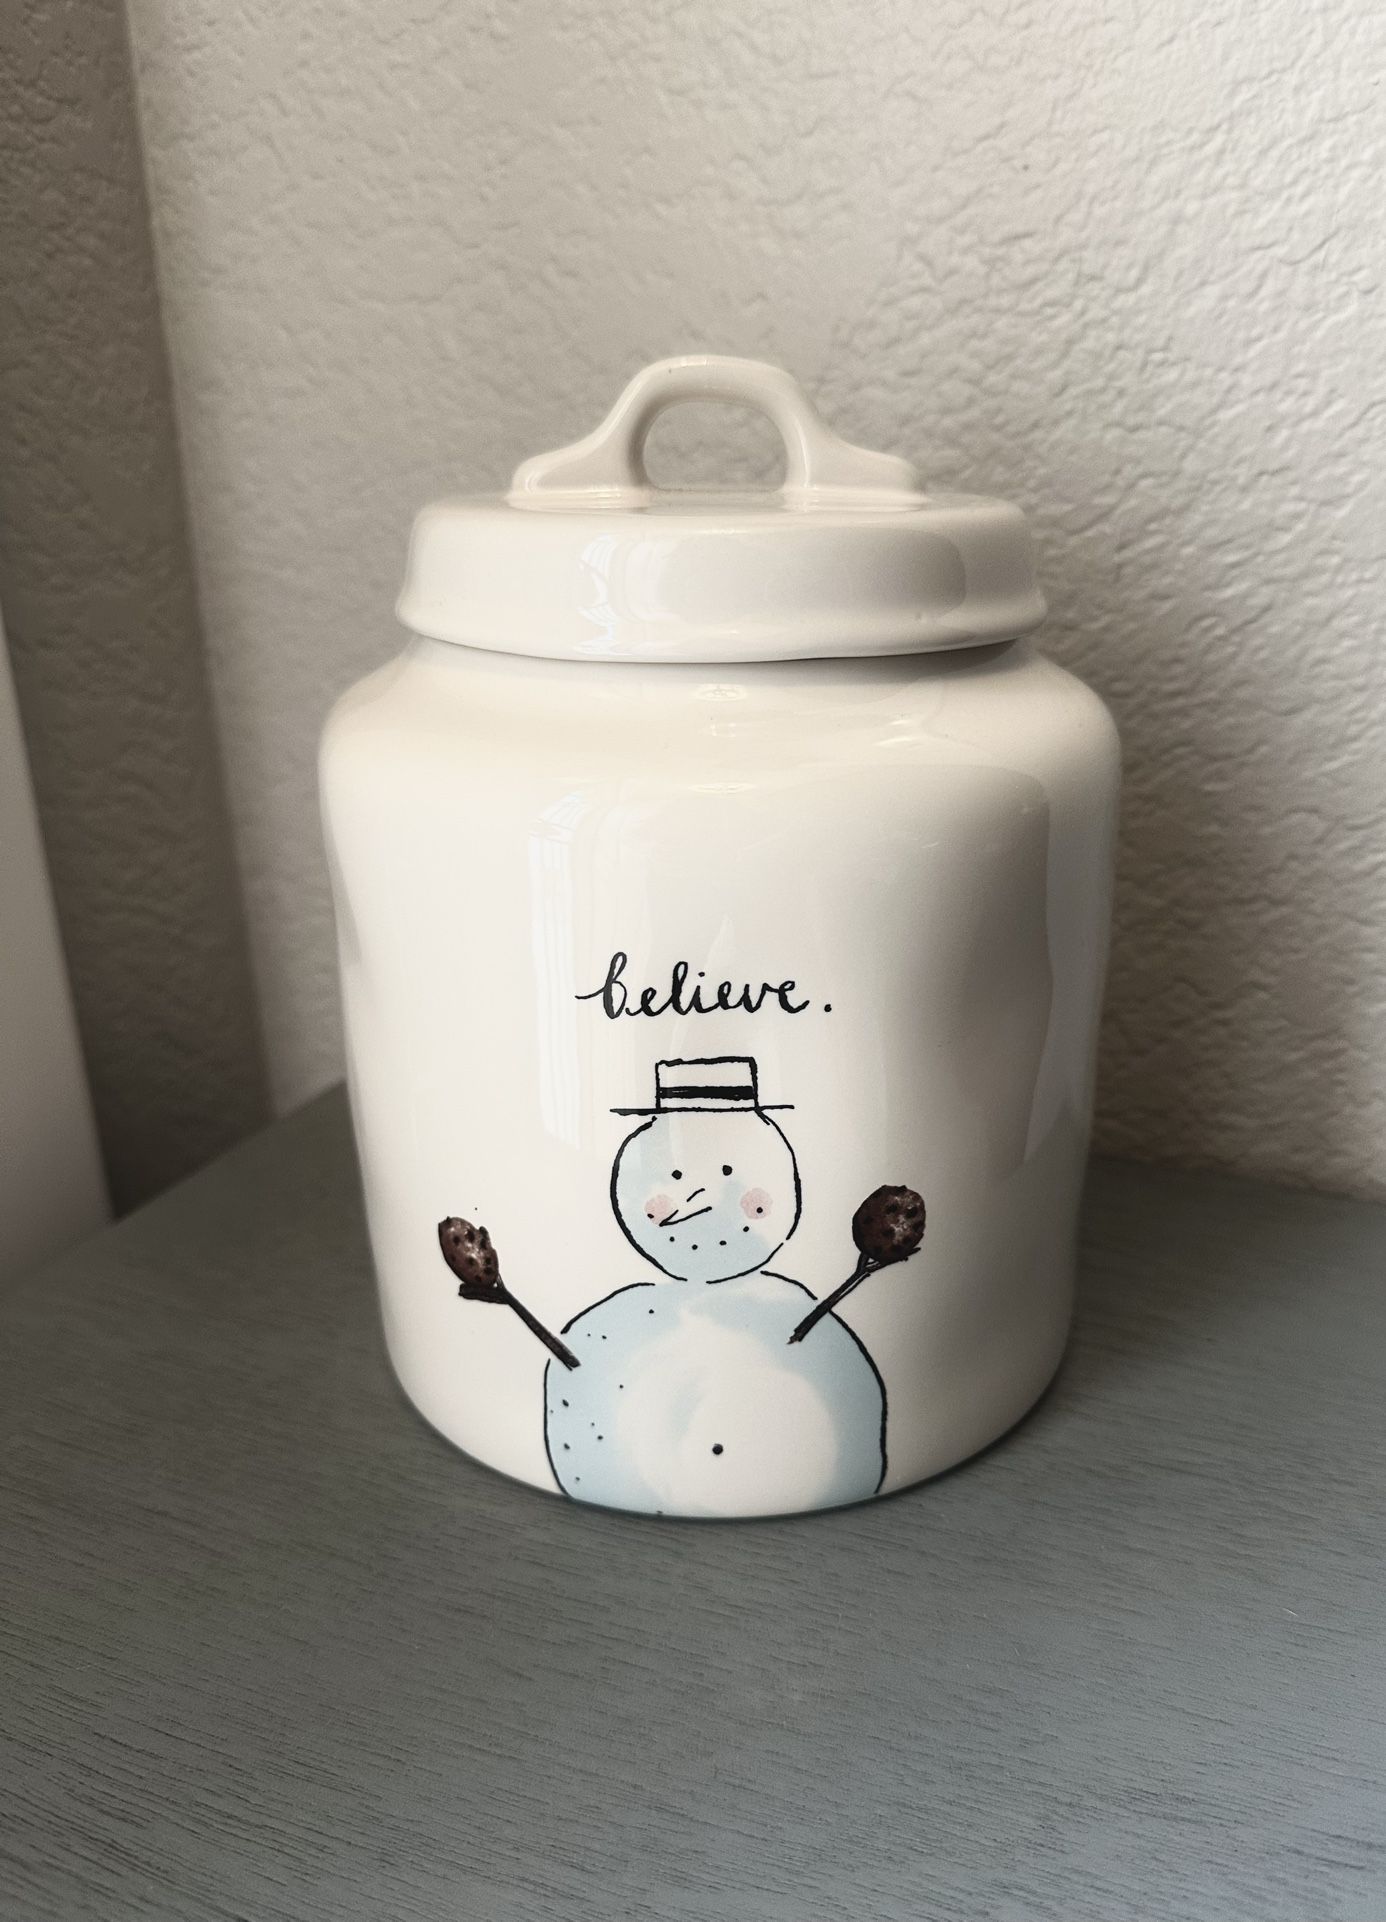 $25…New Rae Dunn large Farmhouse believe. canister.  Please pickup in the area of 36th Ave and Pinnacle peak within 24hours of take greatly appreciate